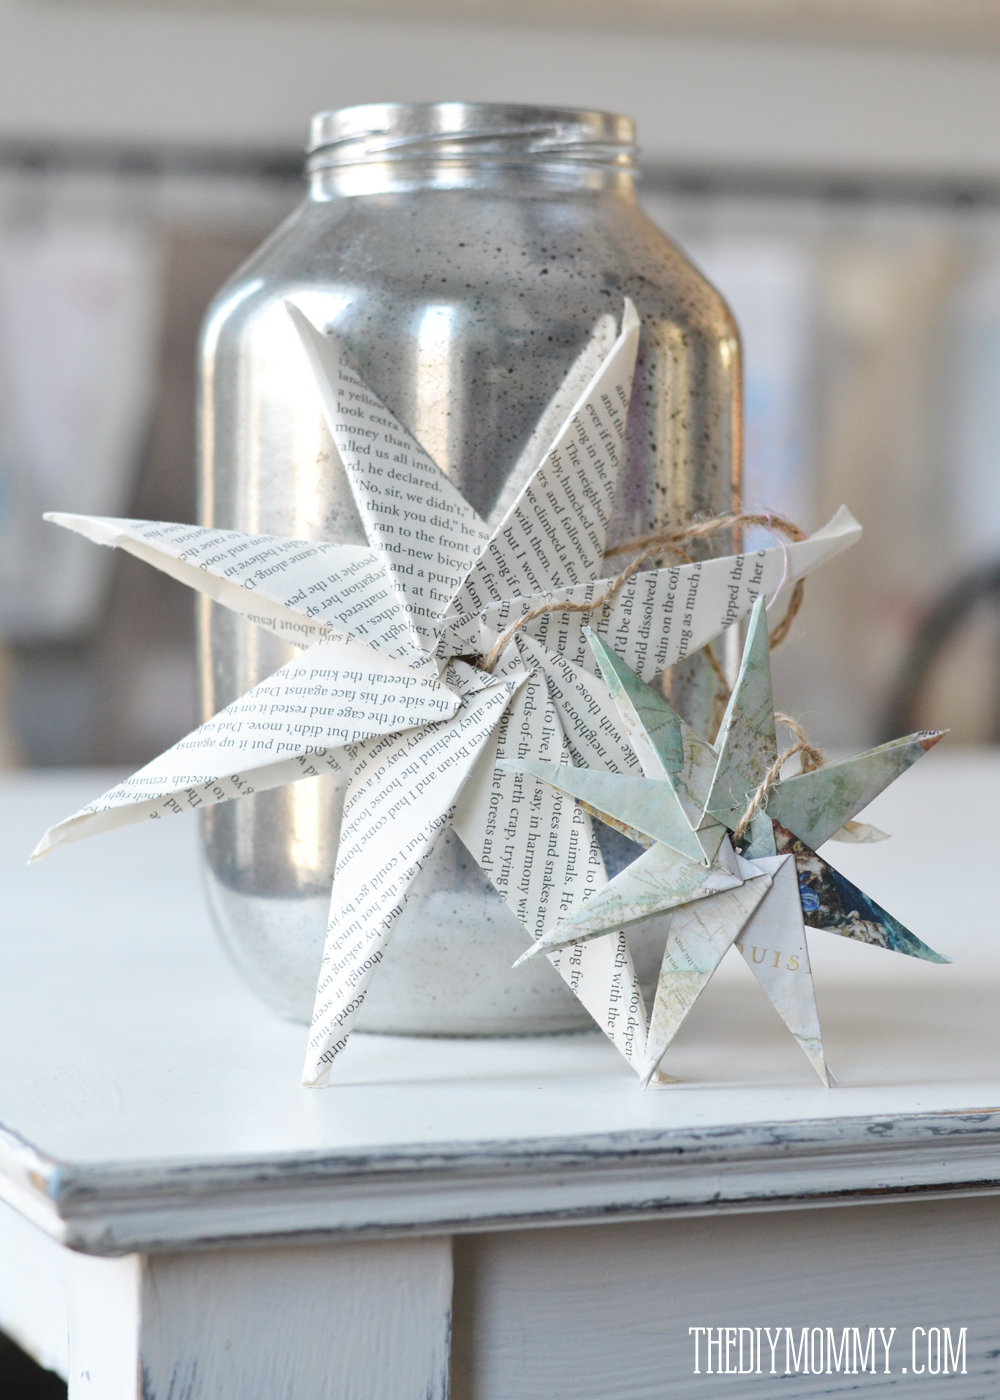 How to make an 8 pointed paper star from book pages or maps. Makes a beautiful Christmas ornament!